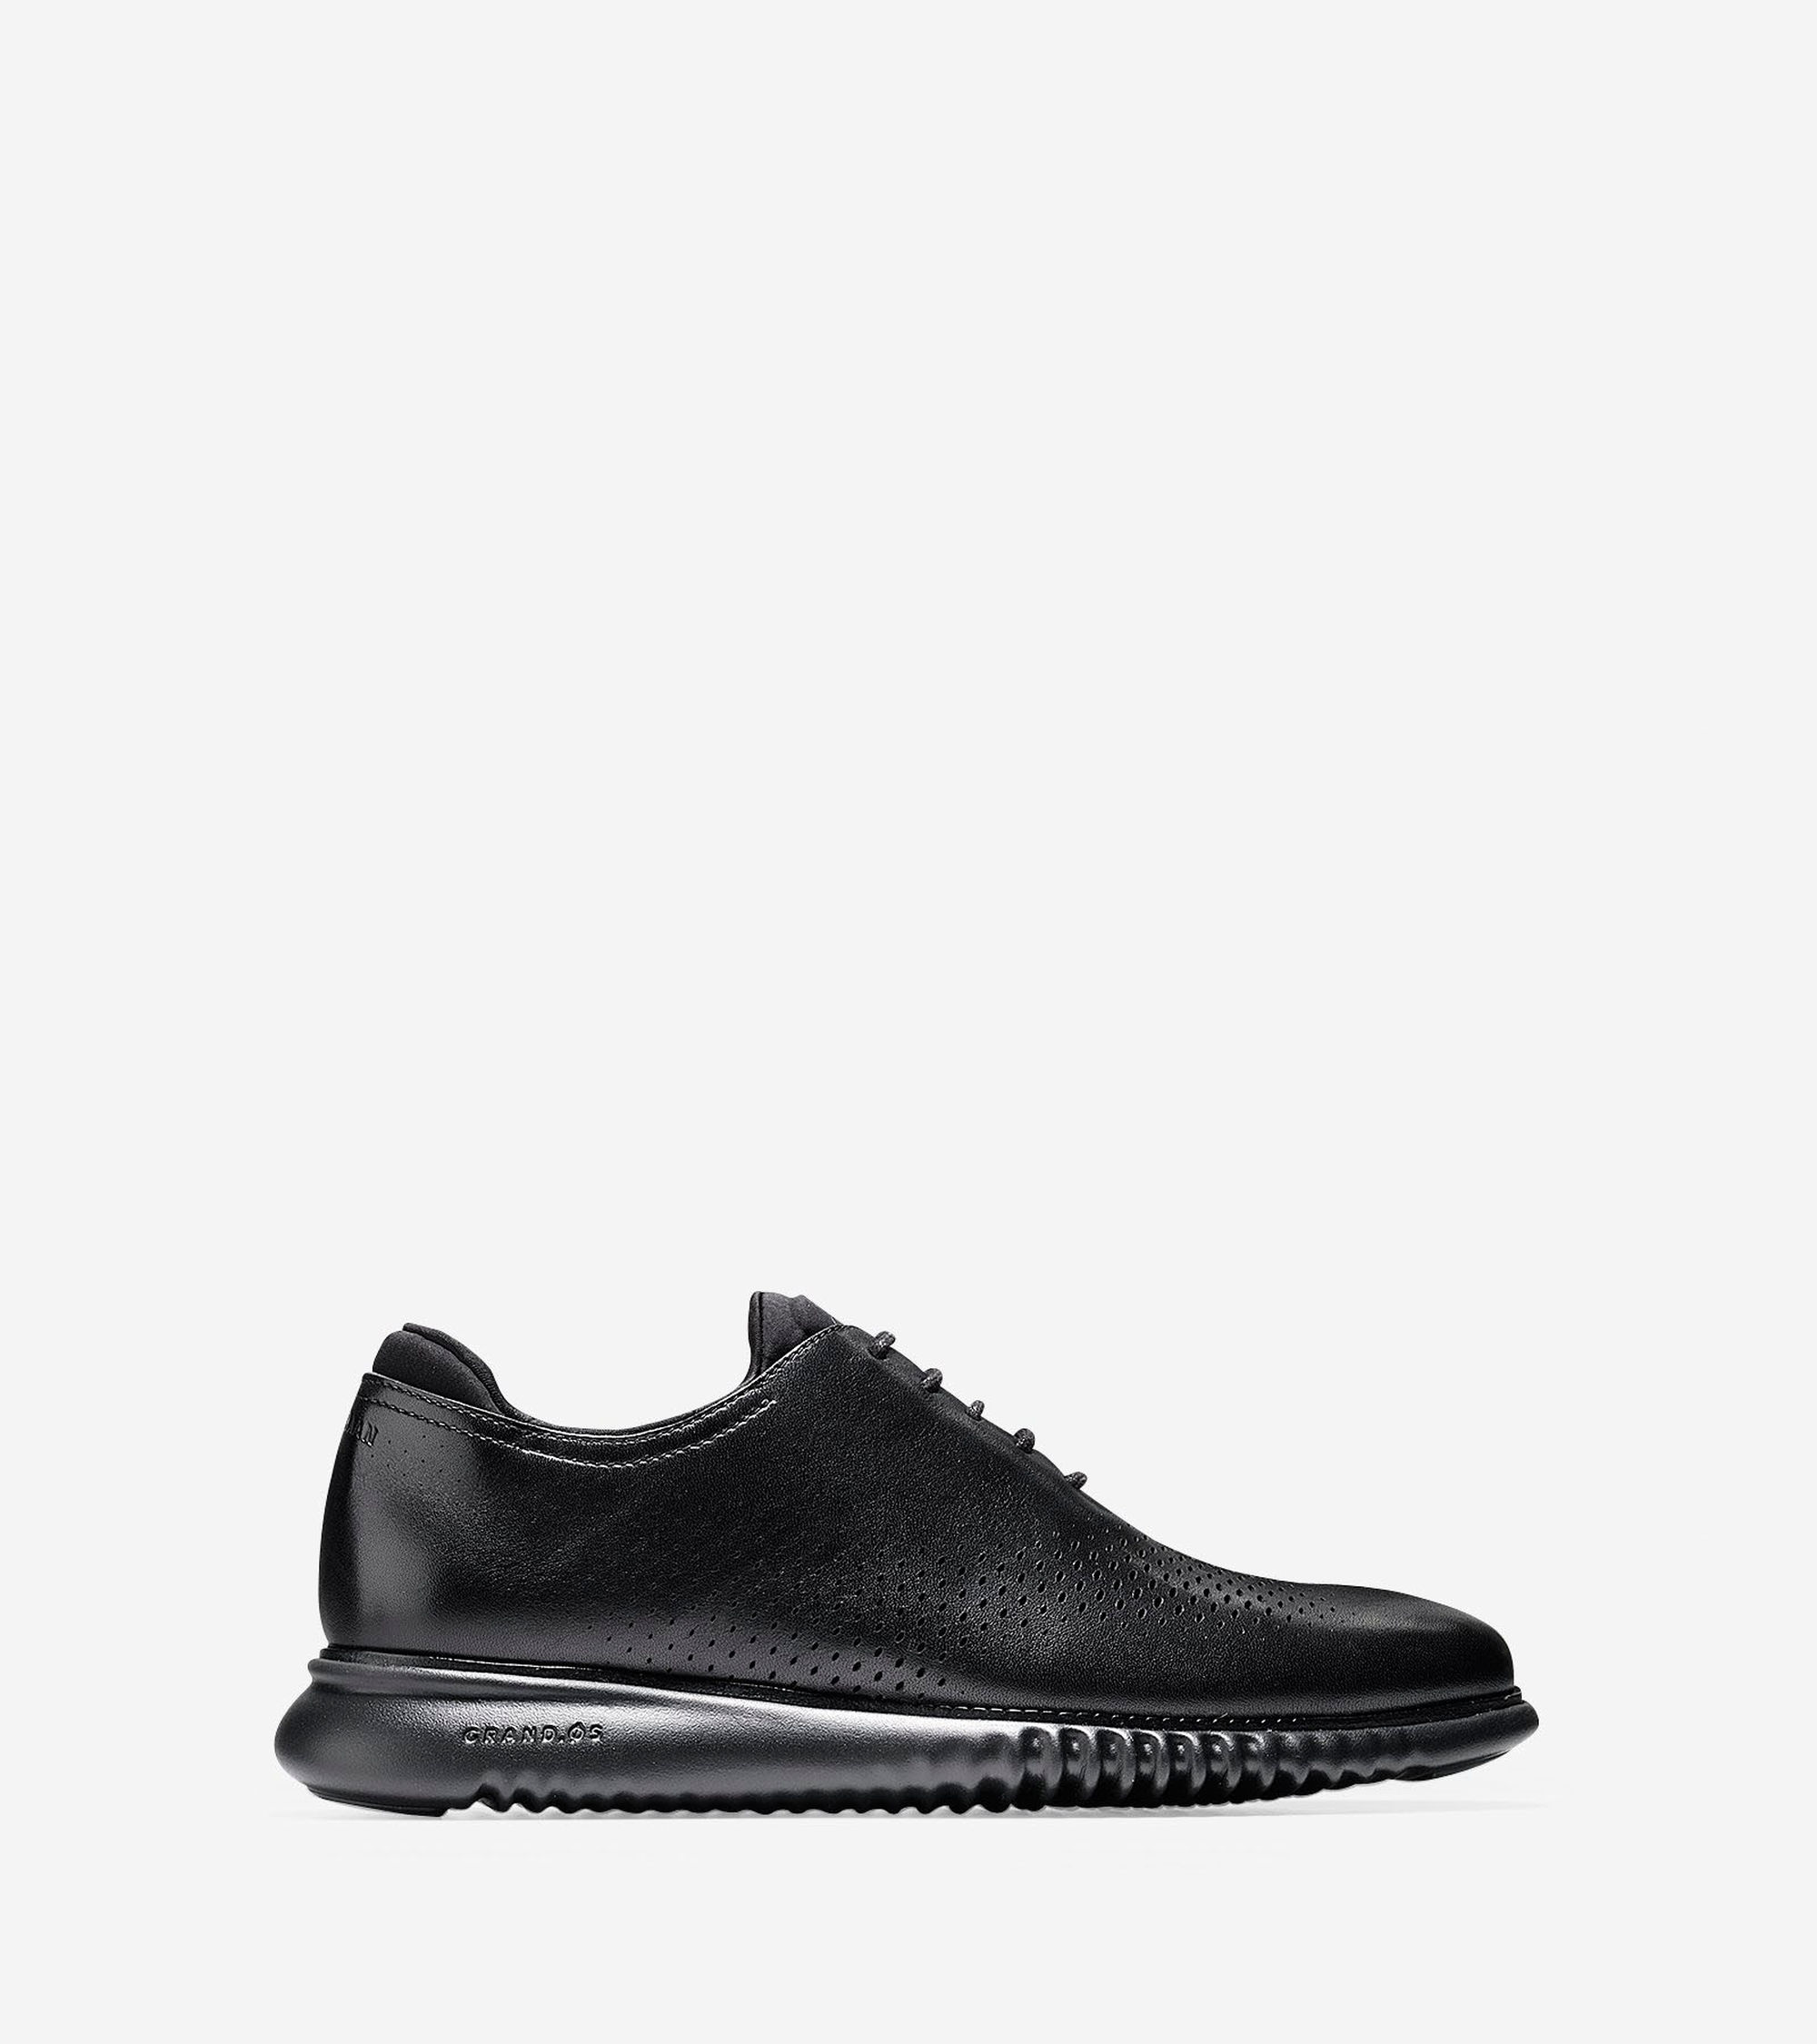 Cole Haan Mens 2.ZEROGRAND Laser Wingtip Oxford At The Mister Shop ...